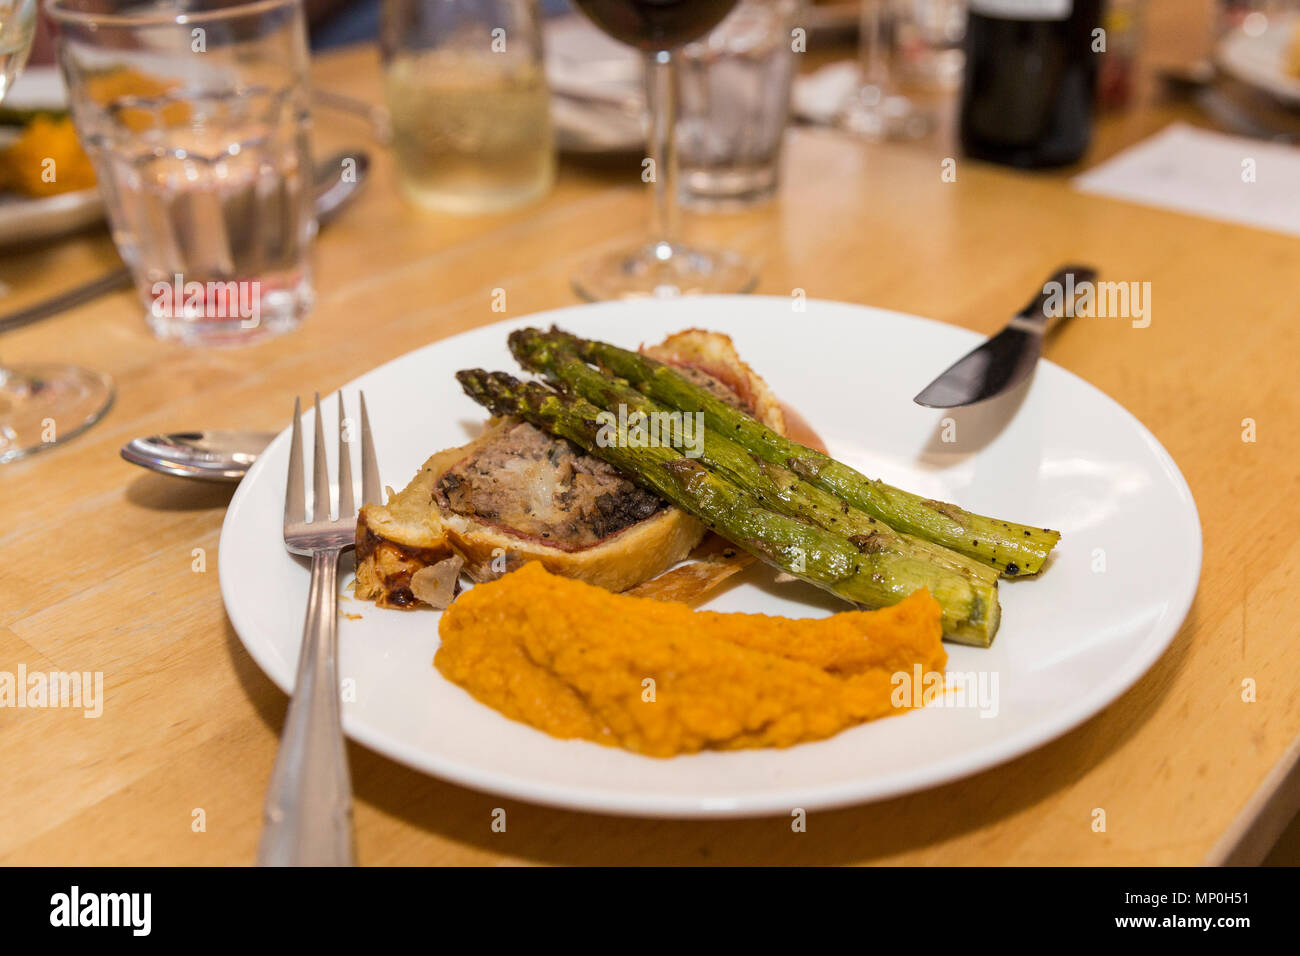 Meatloaf wellington with green asparagus spears and sweet potato garlic mash, main dish, Stock Photo